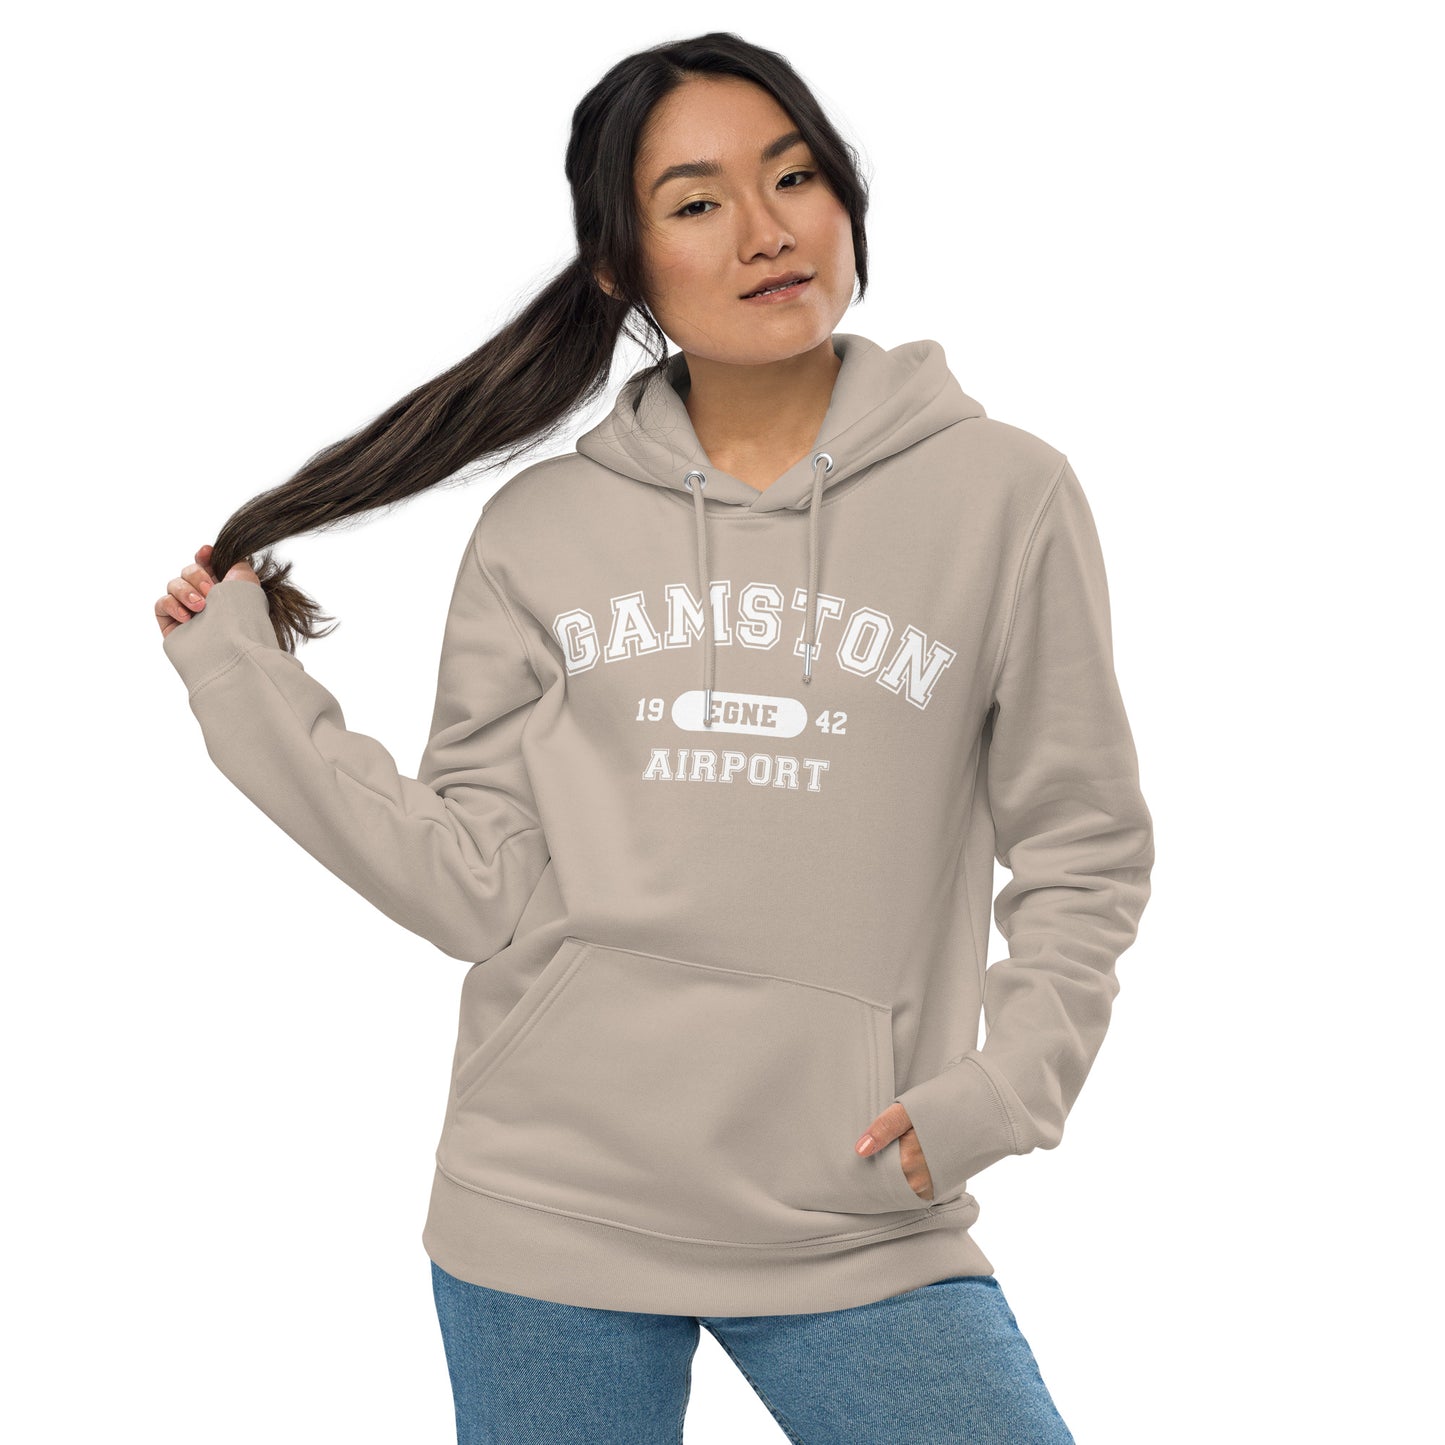 Gamston Airport with ICAO code in collegiate style. Unisex essential eco hoodie.